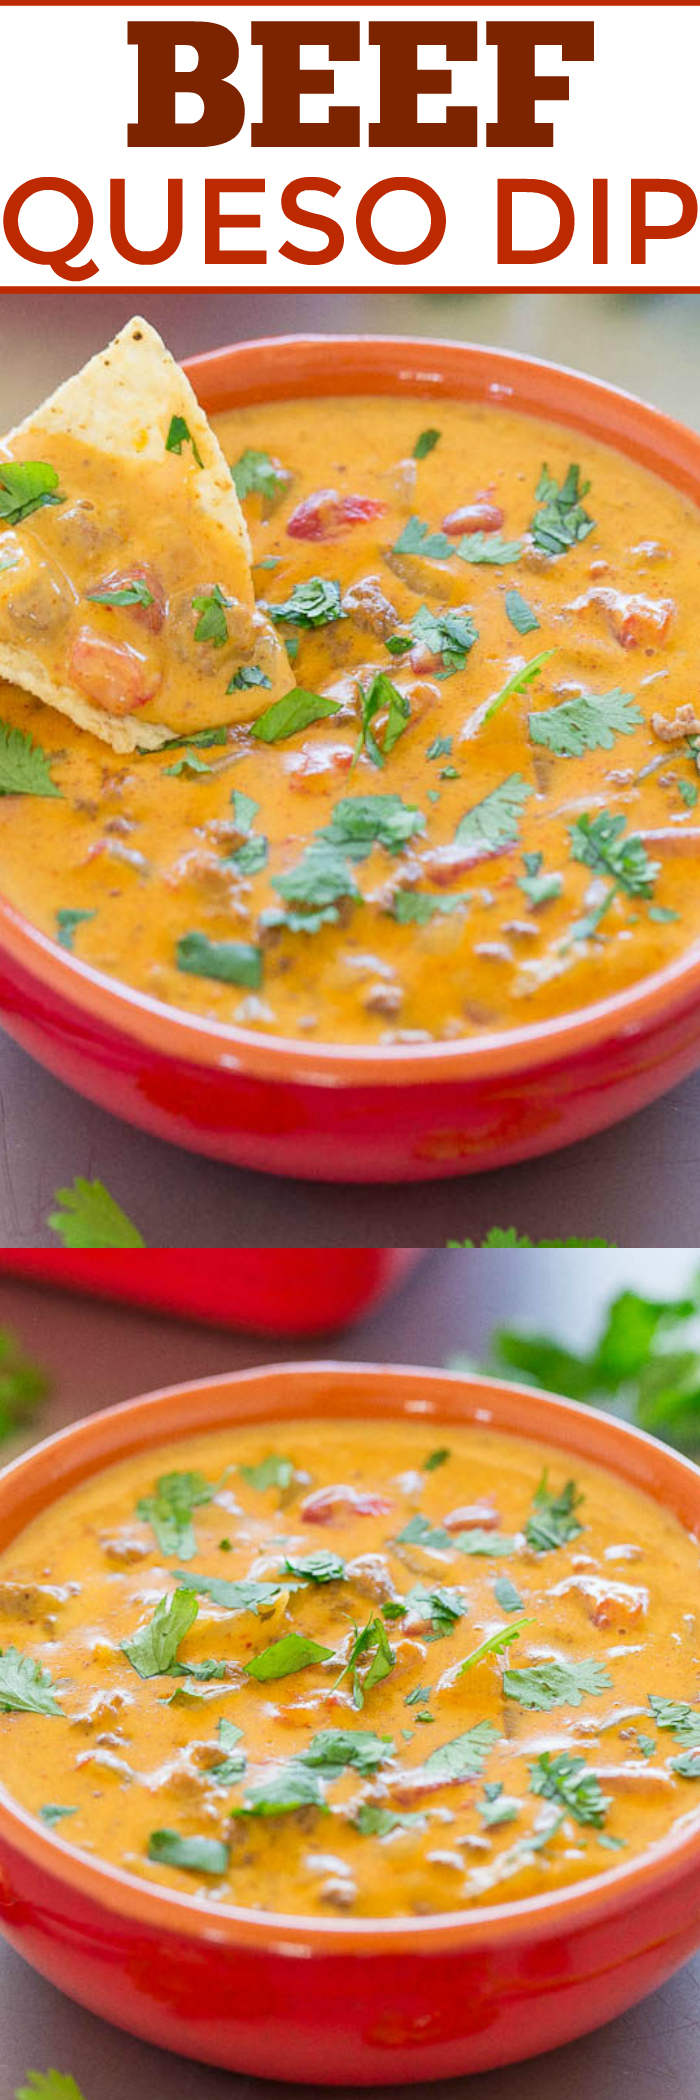 Beef Queso Dip - Caramelized onions, ground beef, taco seasoning, and CHEESE in this FAST and EASY dip everyone loves!! Great for game days, PARTIES, holidays, and events!!